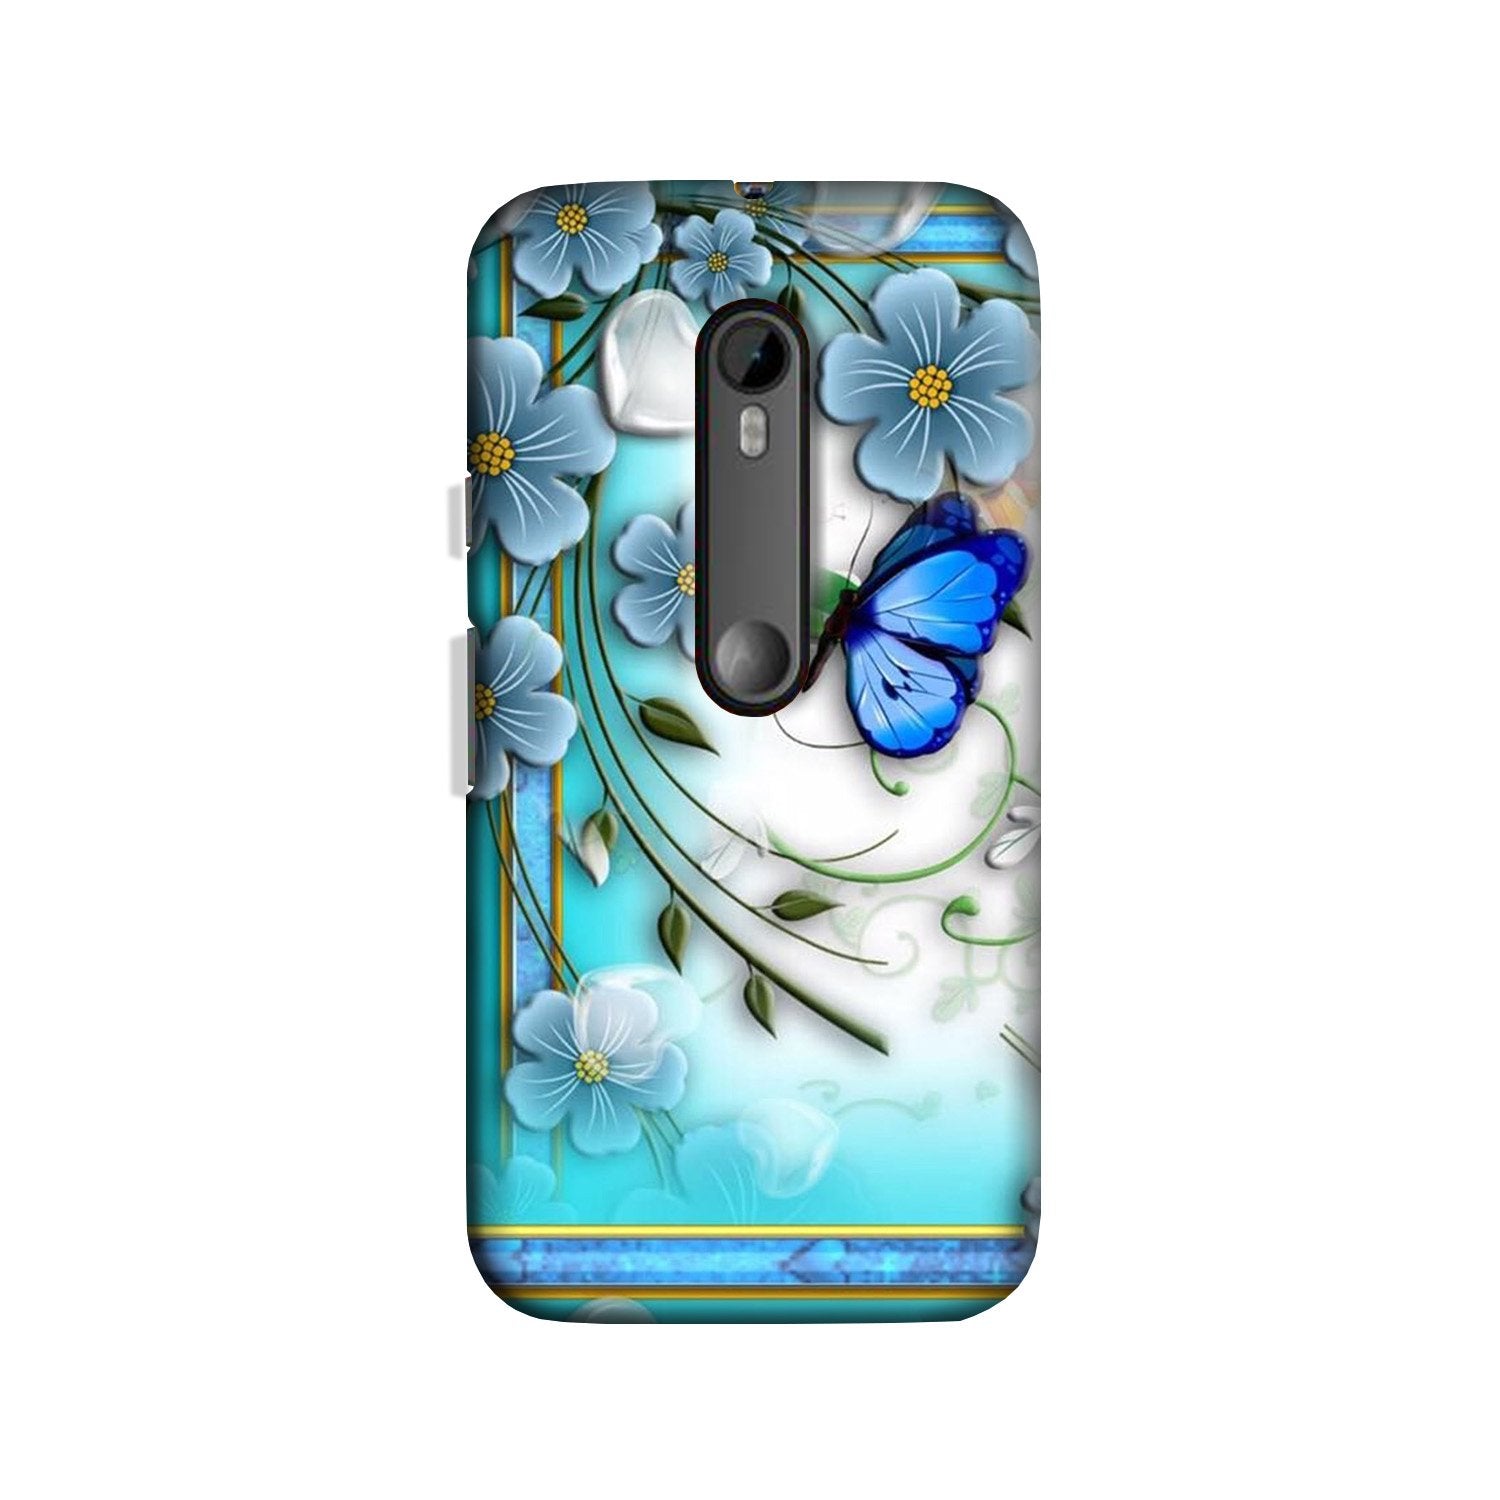 Blue Butterfly Case for Moto X Force